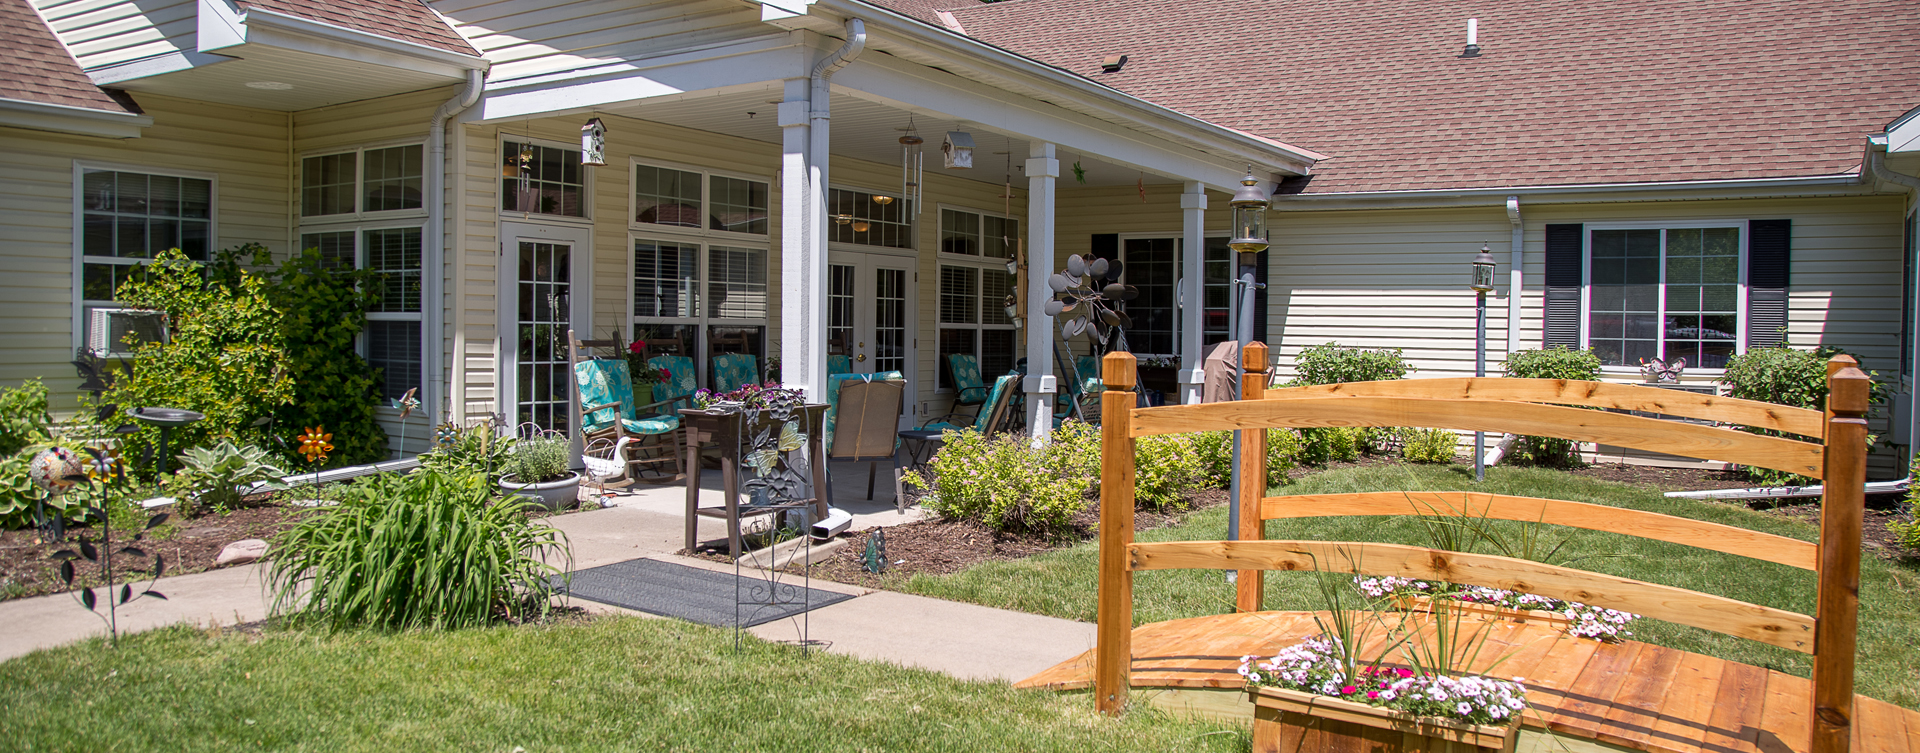 Enjoy the outdoors in a whole new light by stepping into our secure courtyard at Bickford of Moline